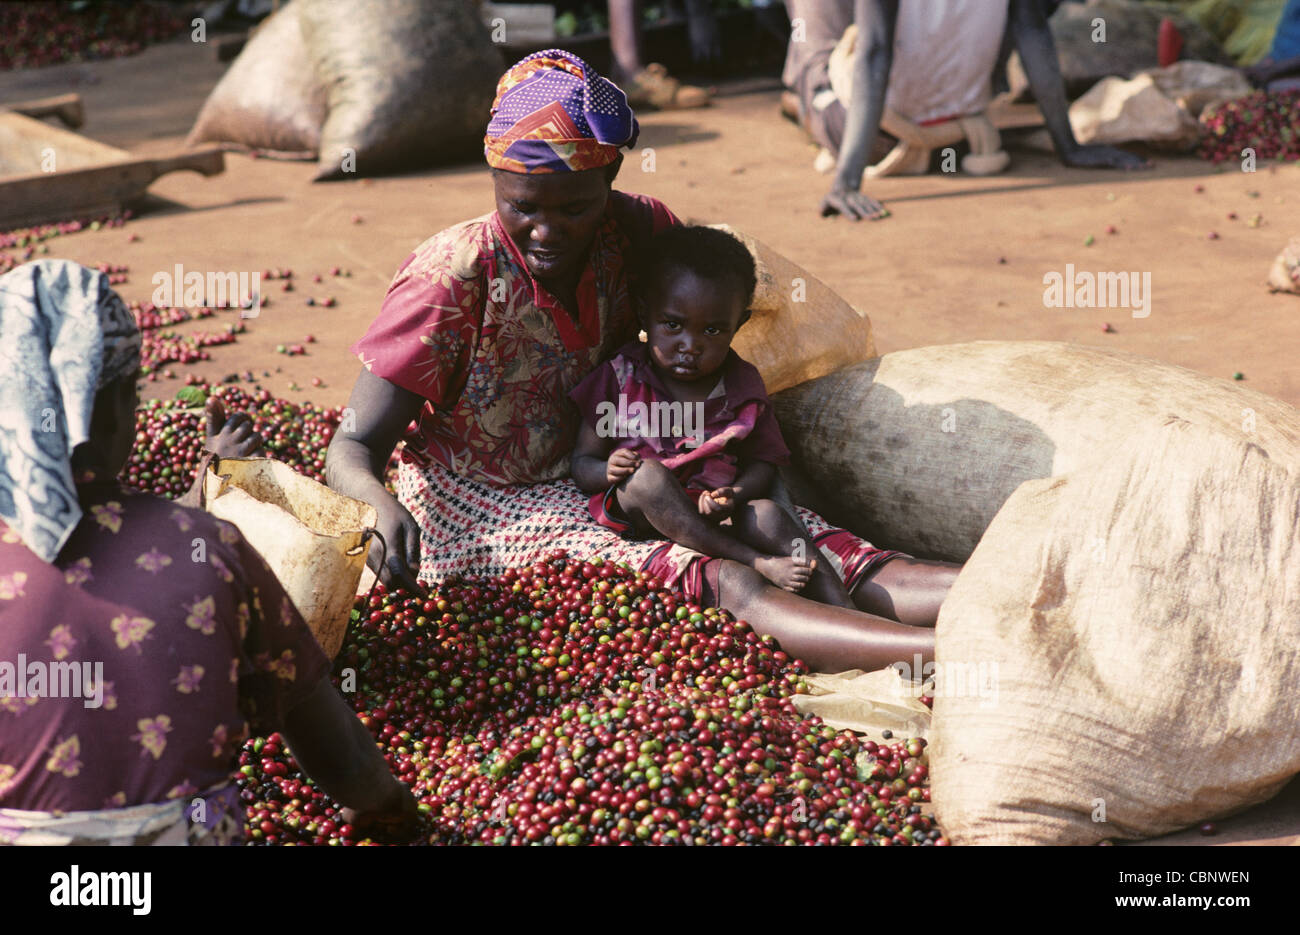 Woman with young child sorting coffee cherries after harvest, Nairobi, Kenya Stock Photo